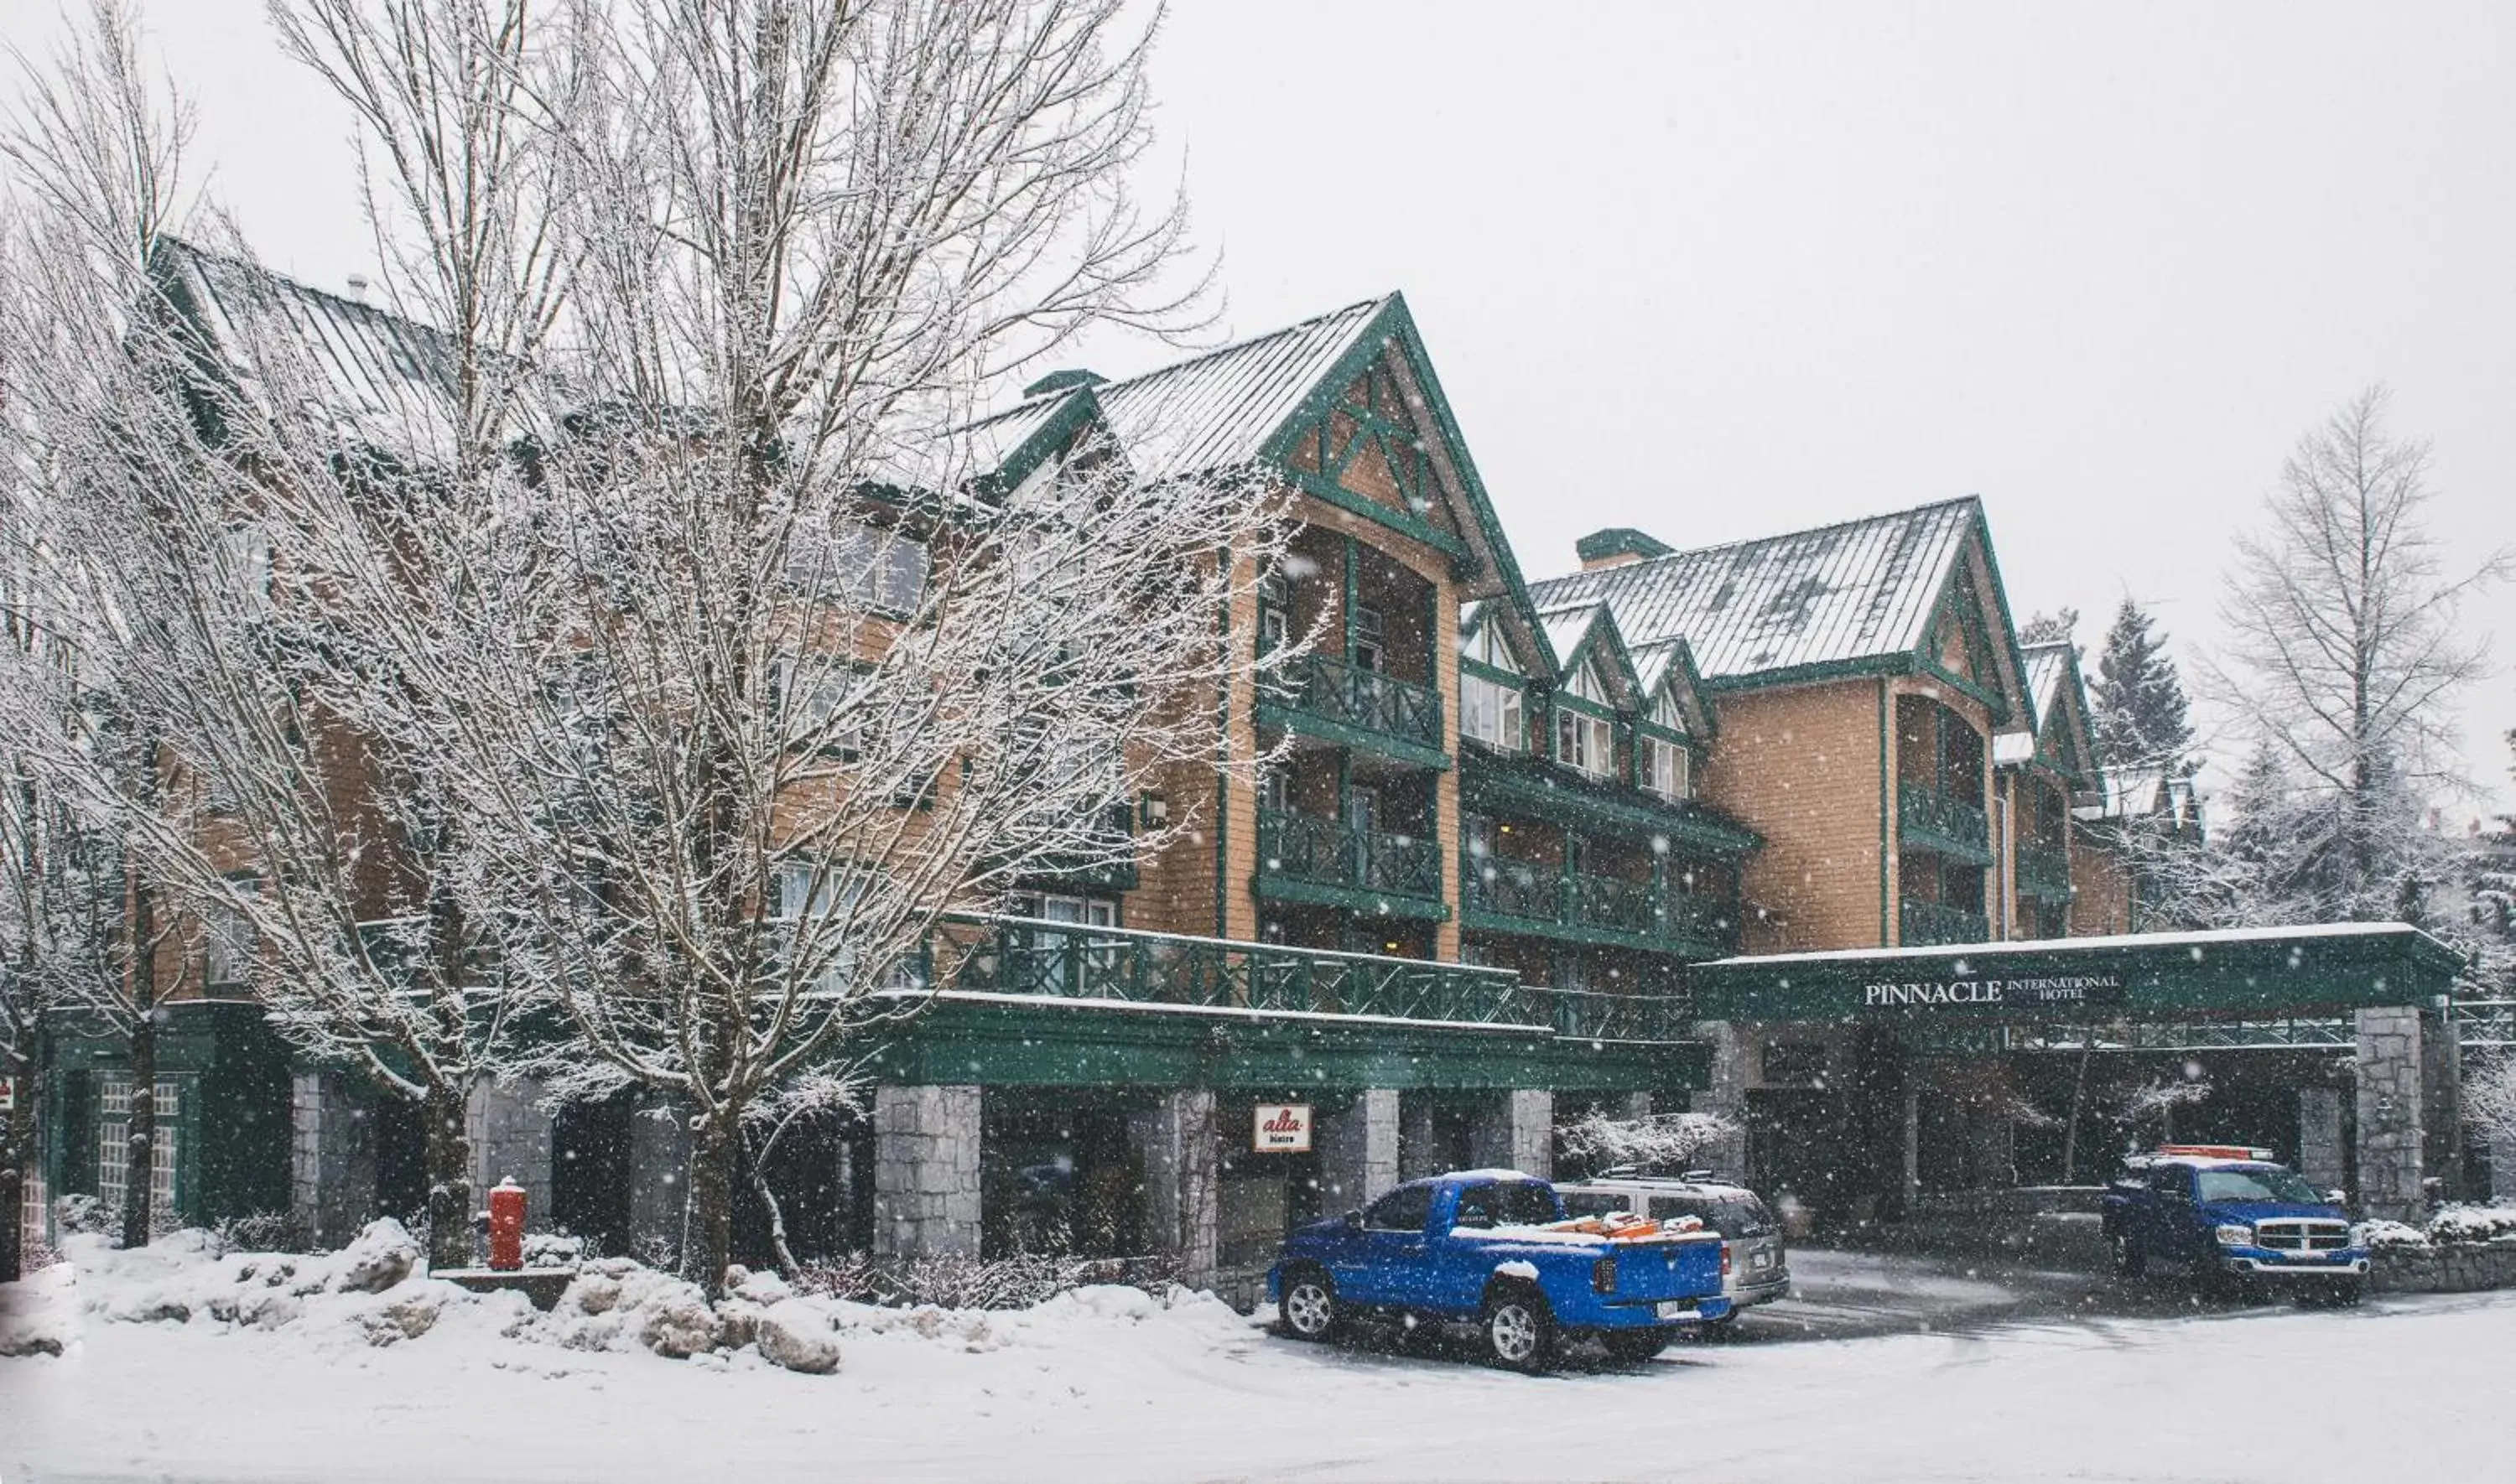 Property building, Winter in Pinnacle Hotel Whistler